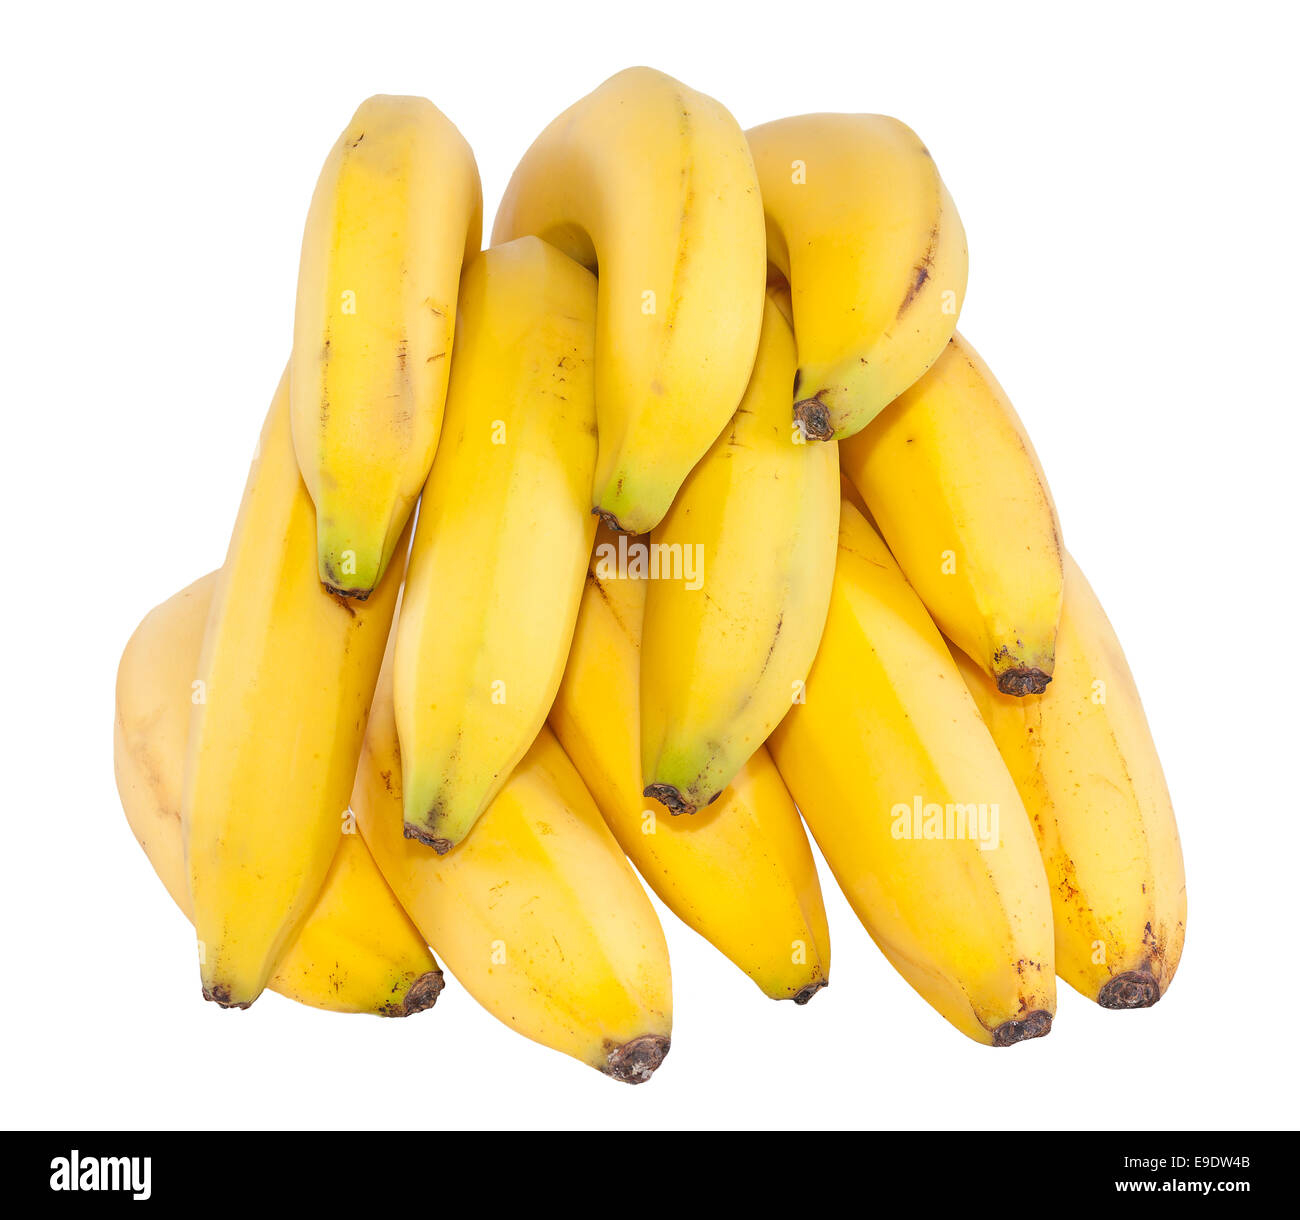 Bunch of bananas isolated on white background. Stock Photo